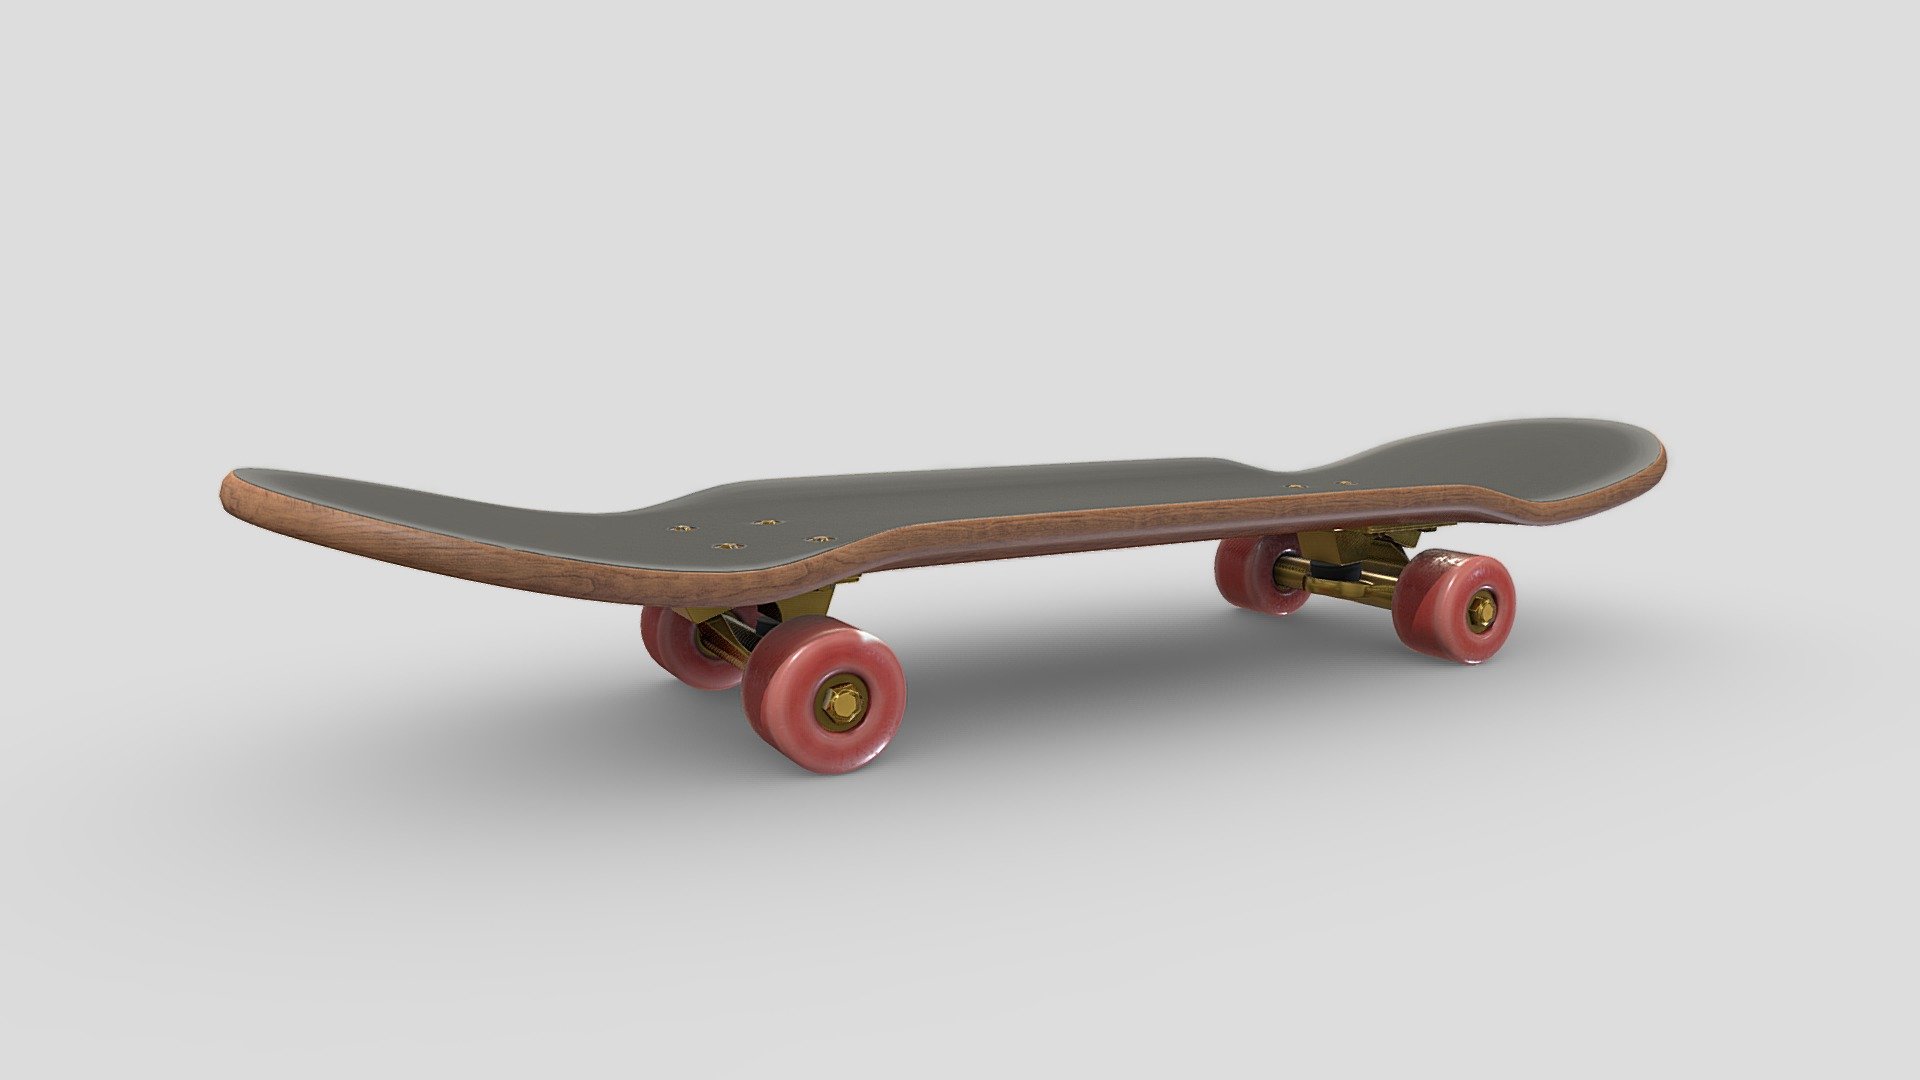 Skateboard collection -  Bling

10 532 Tris
7 360 Vert
4K Textures :
 - Albedo
 - Normal
 - Metalness
 - Roughness

See the whole skateboard collection : https://skfb.ly/oxFrQ

Buy the collection of skateboard (10) and save 20% on the price of each skatesboard - Skateboard collection -  Bling - Buy Royalty Free 3D model by Jerome (dijix009) (@dijix009) 3d model